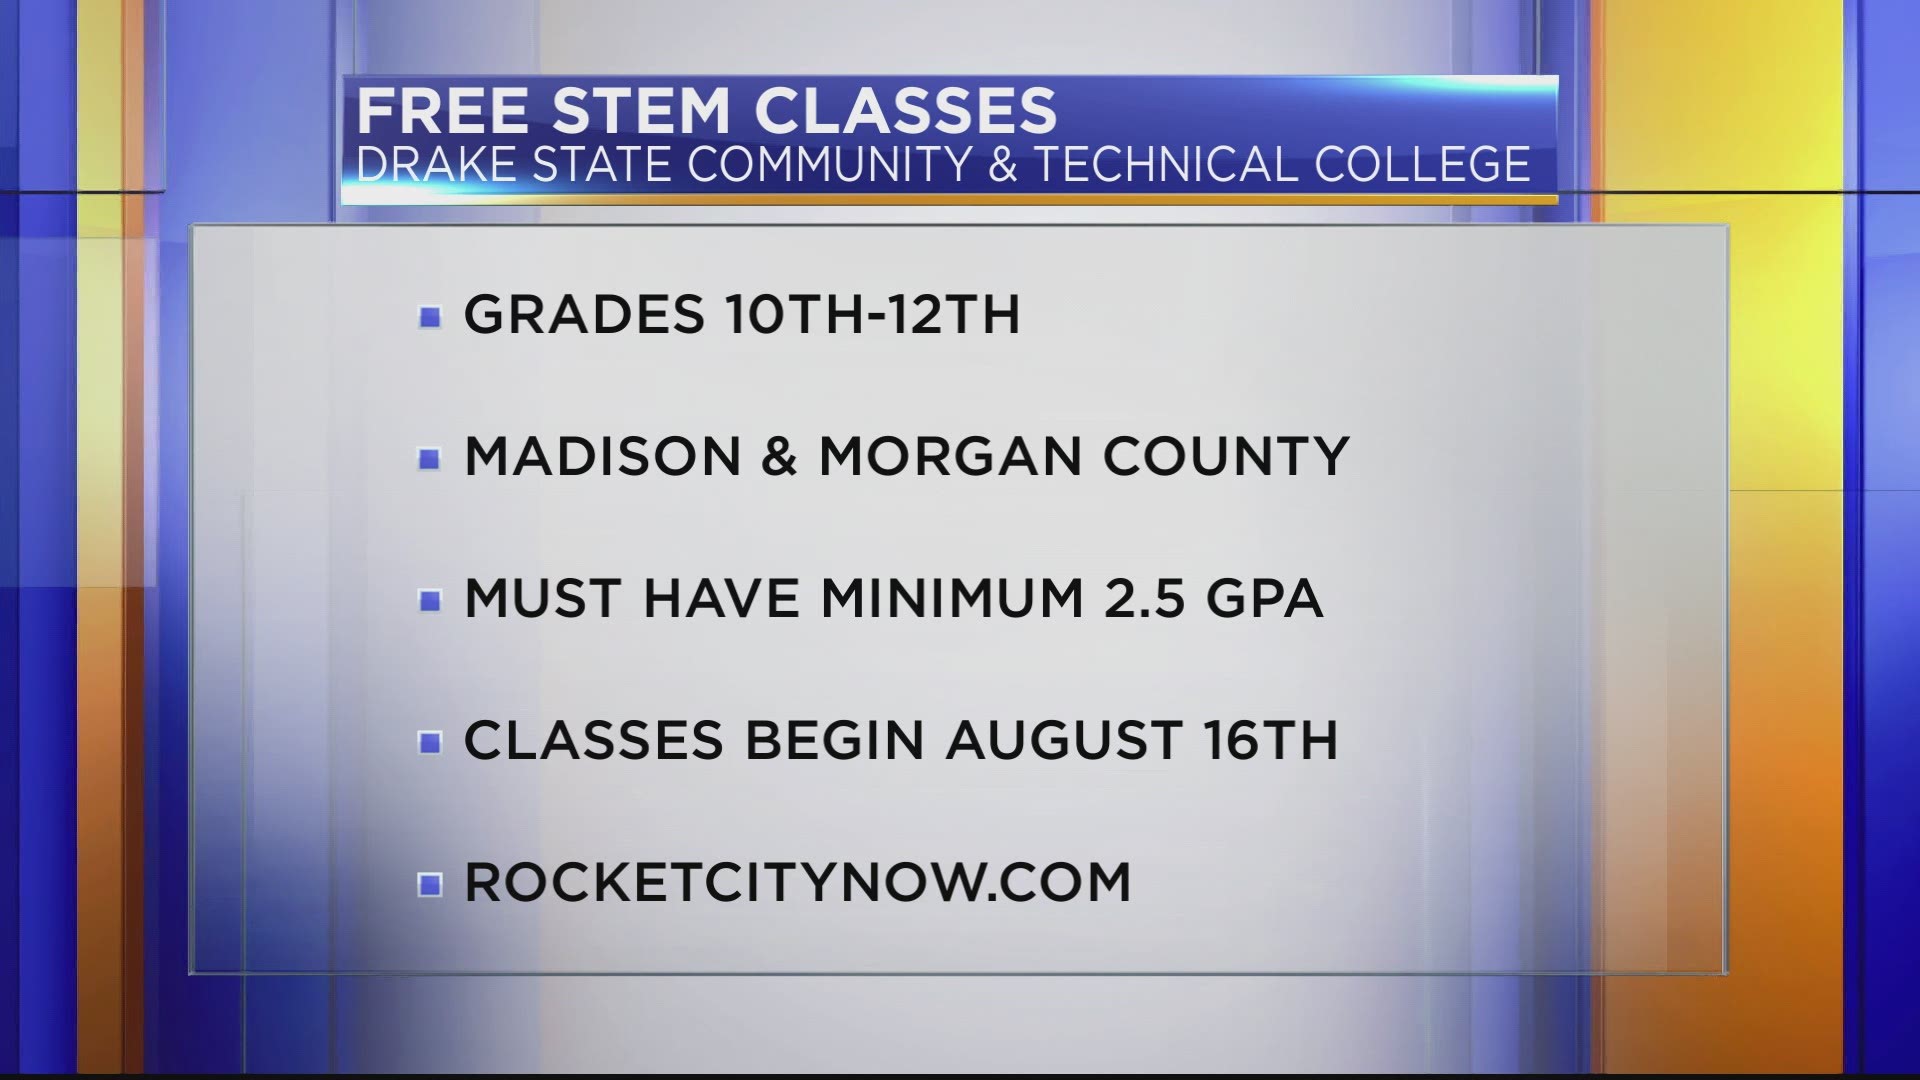 High school students in the 10th, 11th or 12th grade in Madison County and parts of Morgan
County are eligible to enroll in free STEM classes at Drake State.